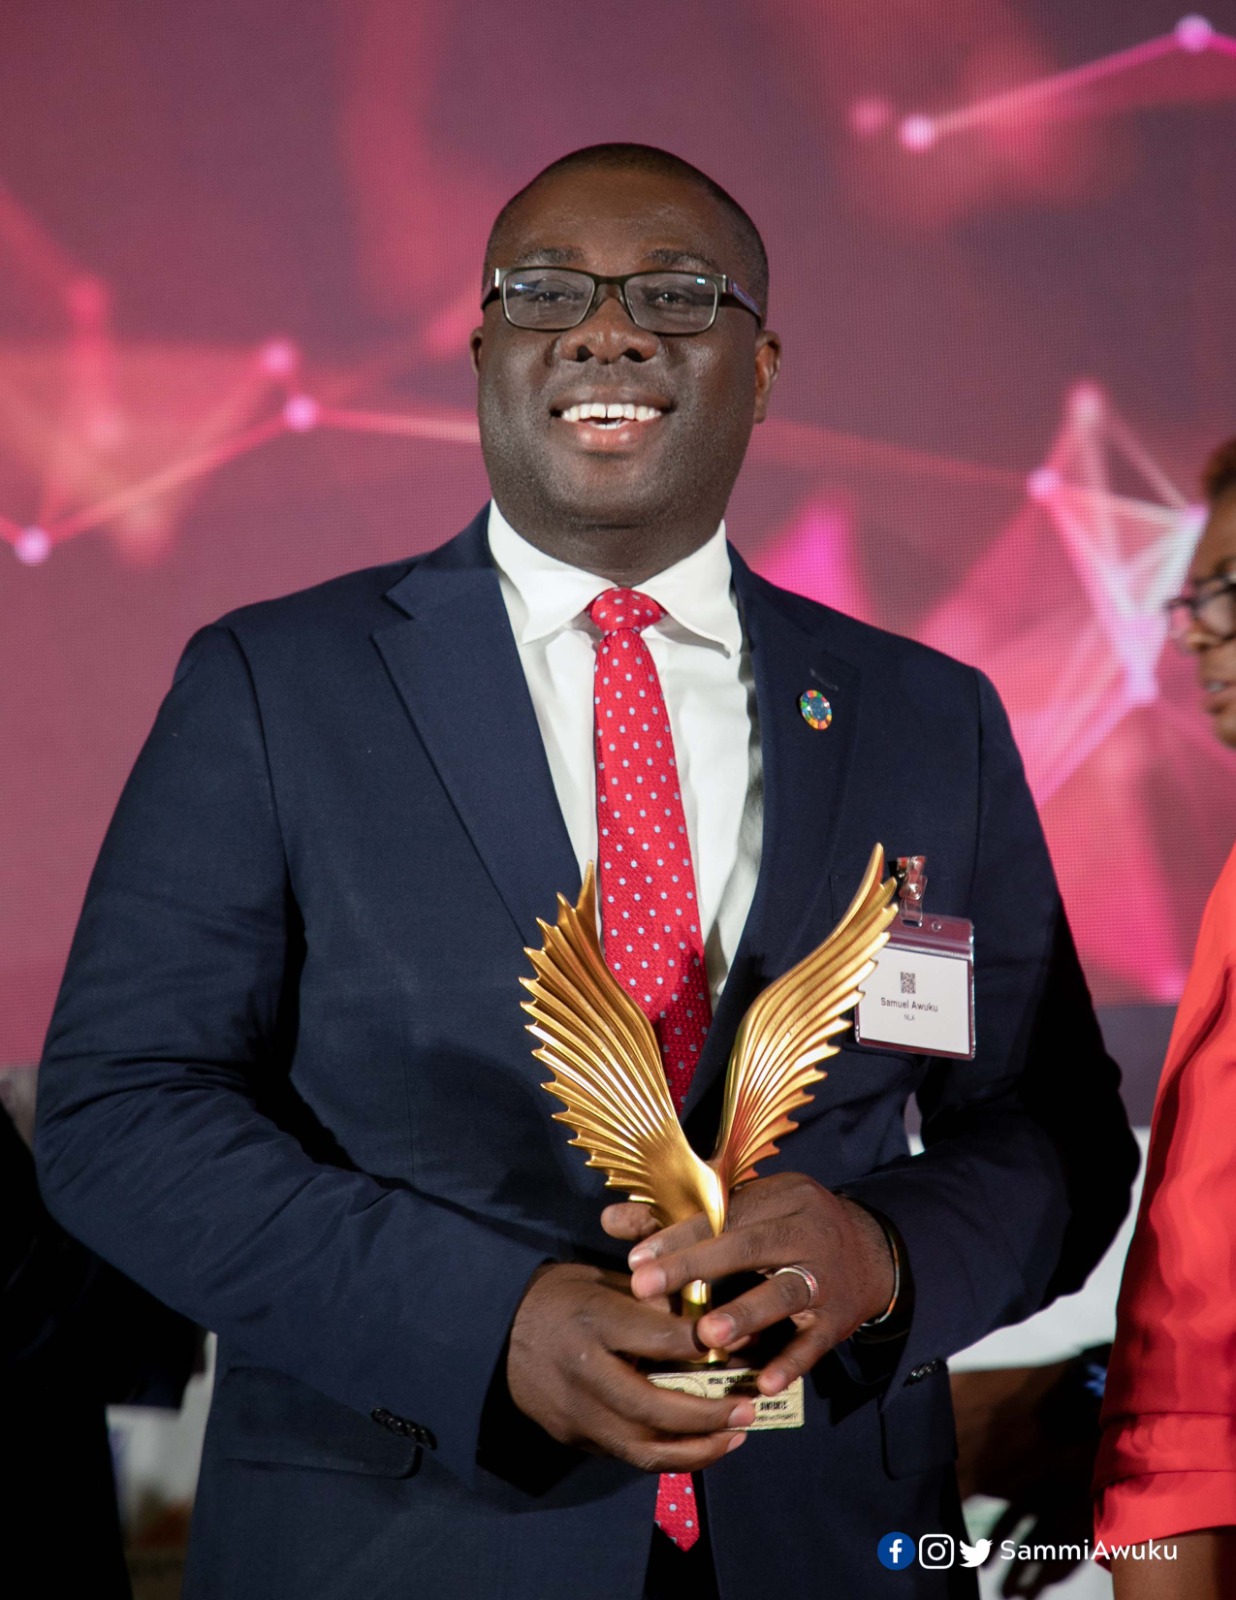 Sammi Awuku wins overall best public sector CEO of the year award